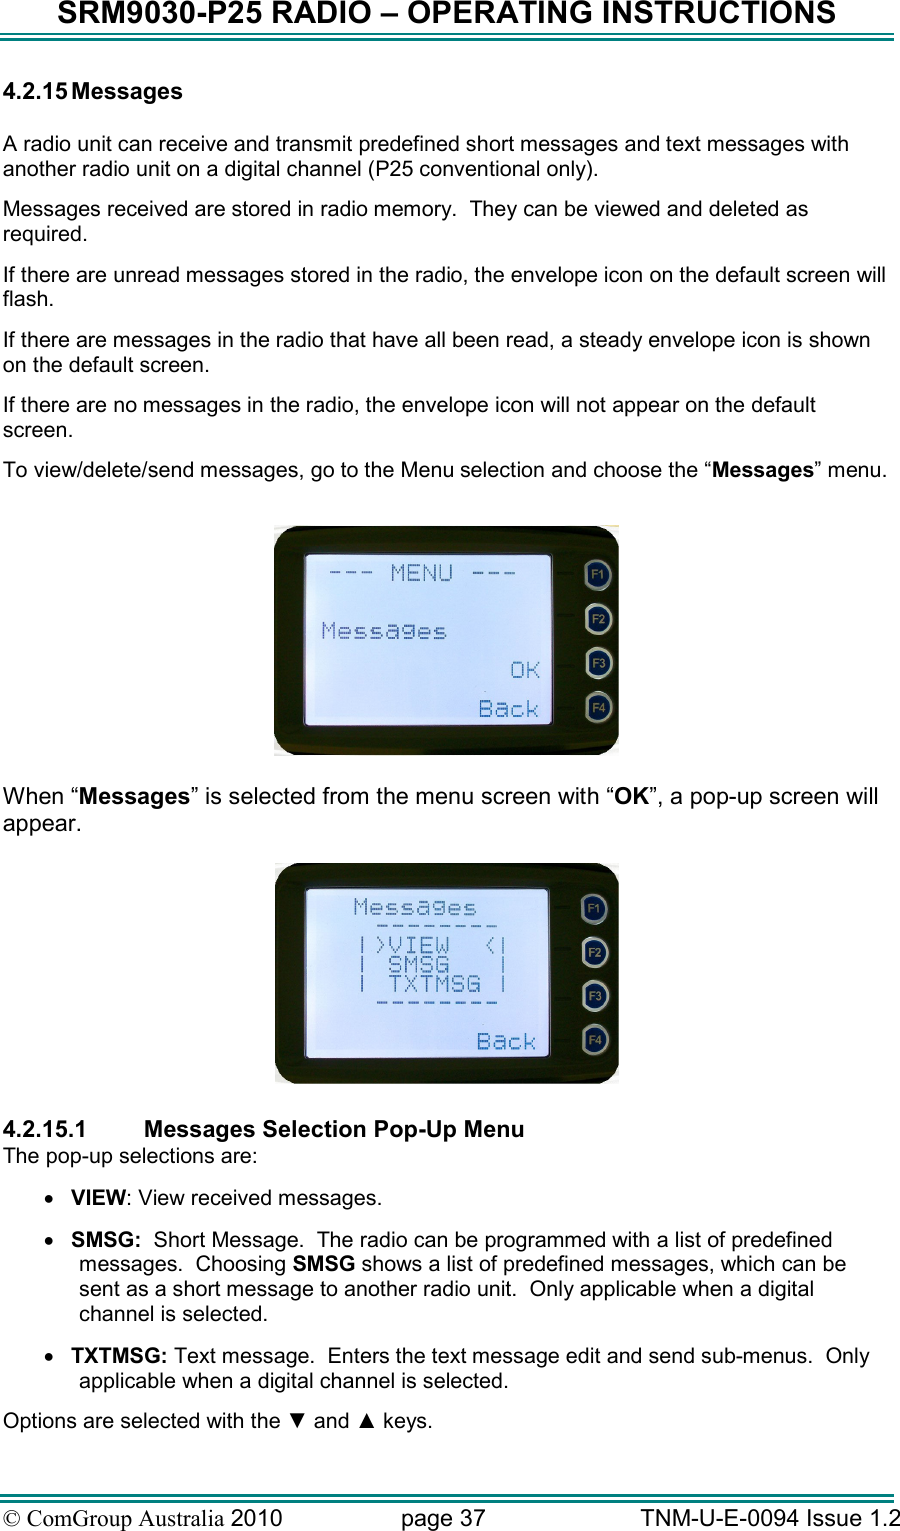 SRM9030-P25 RADIO – OPERATING INSTRUCTIONS © ComGroup Australia 2010  page 37   TNM-U-E-0094 Issue 1.2 4.2.15 Messages   A radio unit can receive and transmit predefined short messages and text messages with another radio unit on a digital channel (P25 conventional only). Messages received are stored in radio memory.  They can be viewed and deleted as required.   If there are unread messages stored in the radio, the envelope icon on the default screen will flash. If there are messages in the radio that have all been read, a steady envelope icon is shown on the default screen. If there are no messages in the radio, the envelope icon will not appear on the default screen. To view/delete/send messages, go to the Menu selection and choose the “Messages” menu.    When “Messages” is selected from the menu screen with “OK”, a pop-up screen will appear.     4.2.15.1  Messages Selection Pop-Up Menu The pop-up selections are: • VIEW: View received messages. • SMSG:  Short Message.  The radio can be programmed with a list of predefined messages.  Choosing SMSG shows a list of predefined messages, which can be sent as a short message to another radio unit.  Only applicable when a digital channel is selected. • TXTMSG: Text message.  Enters the text message edit and send sub-menus.  Only applicable when a digital channel is selected. Options are selected with the ▼ and ▲ keys. 